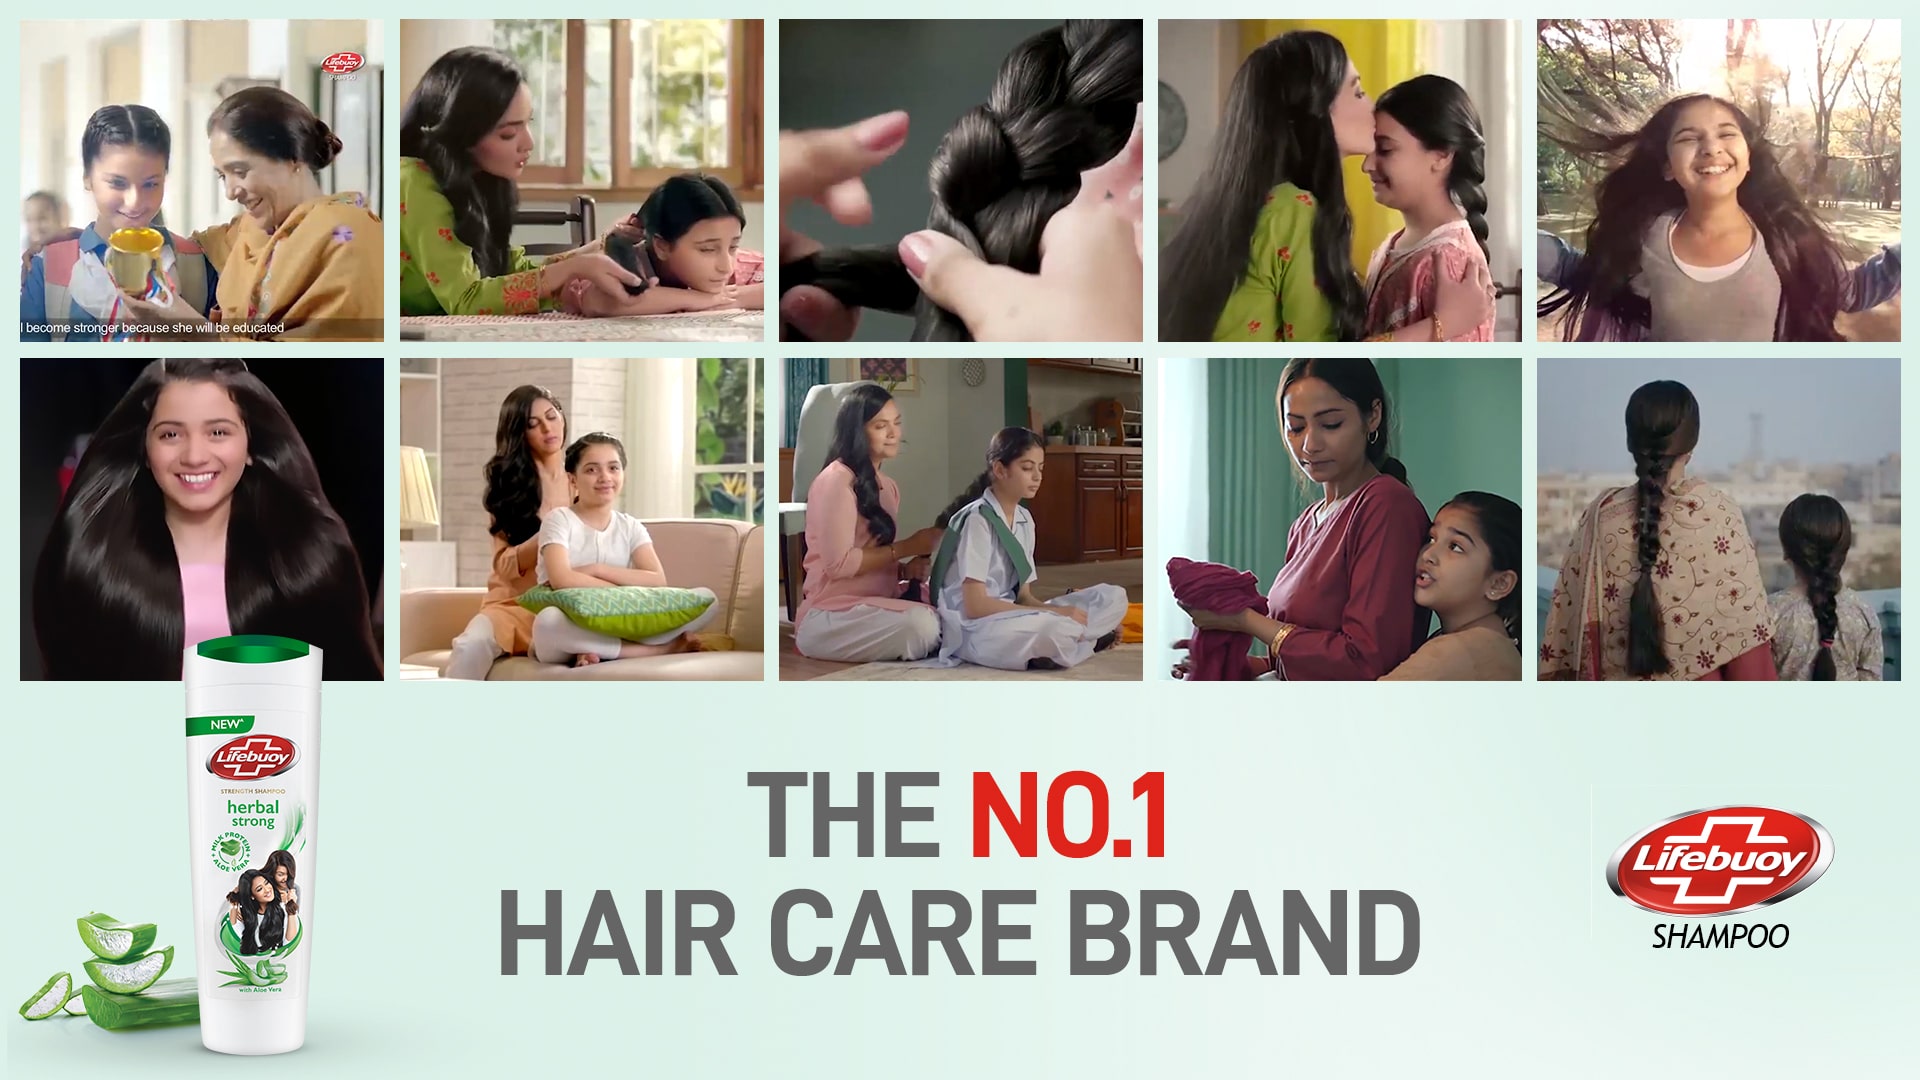 The No.1 Hair Care Brand